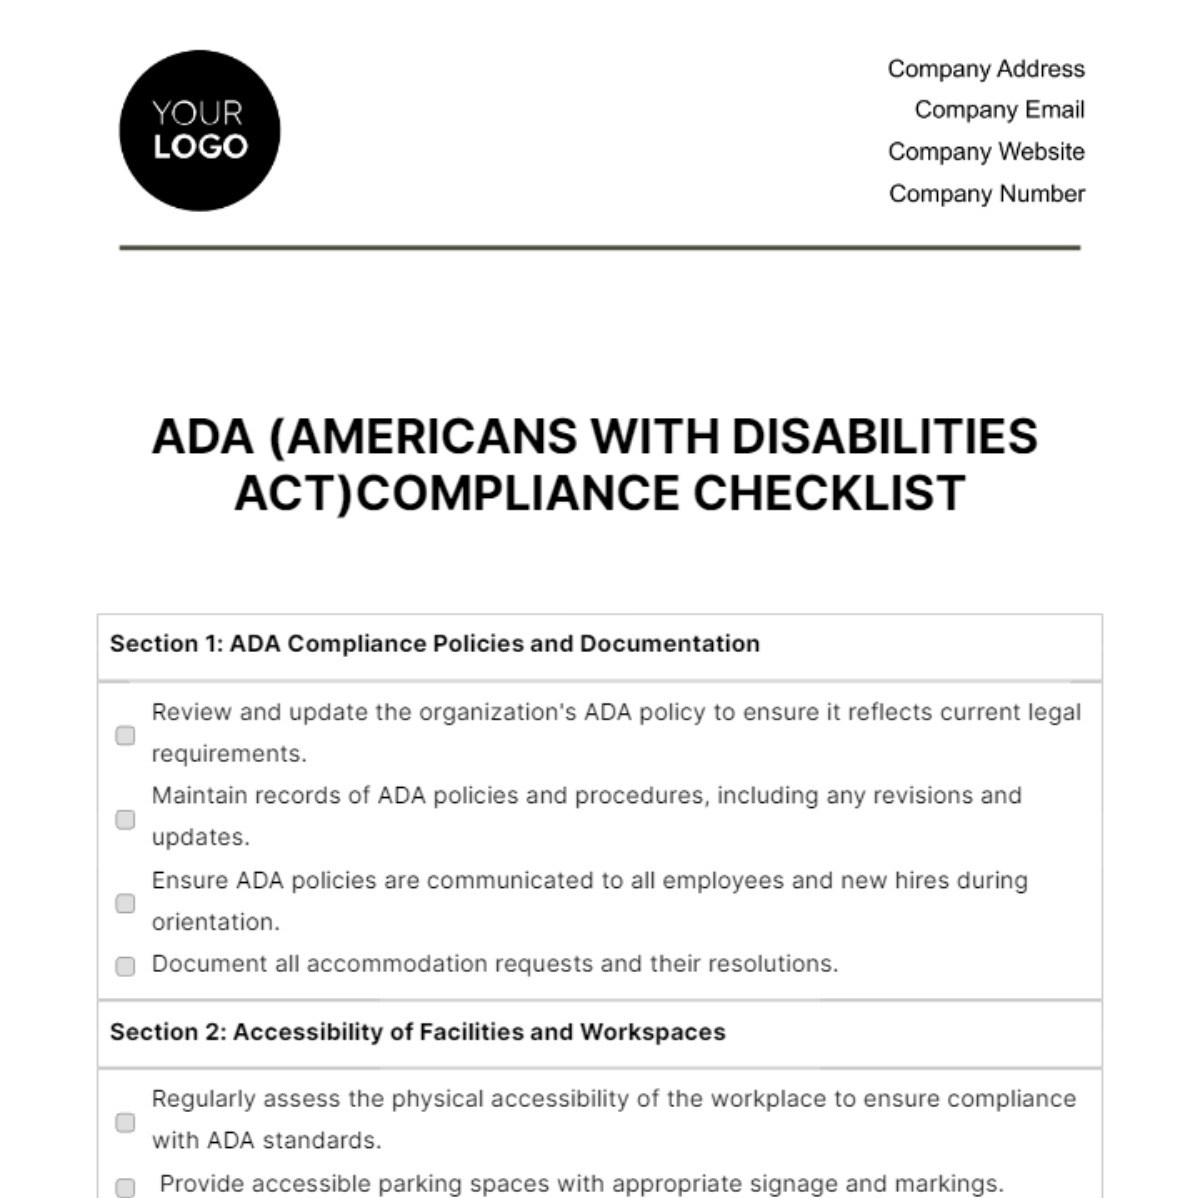 Free ADA (Americans with Disabilities Act) Compliance Checklist HR Template